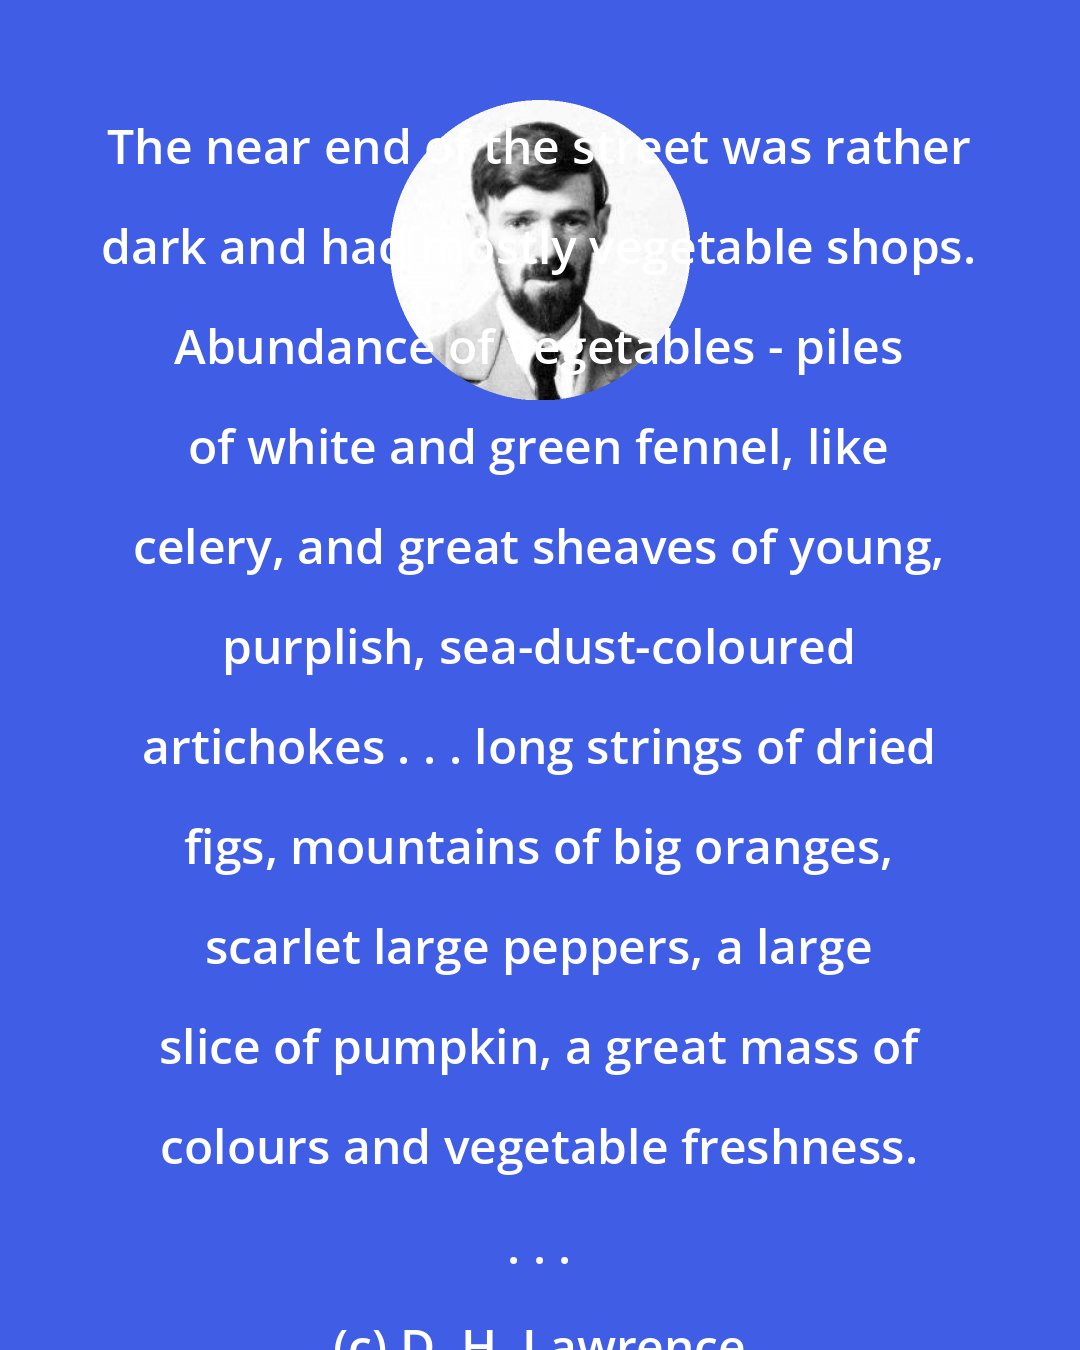 D. H. Lawrence: The near end of the street was rather dark and had mostly vegetable shops. Abundance of vegetables - piles of white and green fennel, like celery, and great sheaves of young, purplish, sea-dust-coloured artichokes . . . long strings of dried figs, mountains of big oranges, scarlet large peppers, a large slice of pumpkin, a great mass of colours and vegetable freshness. . . .